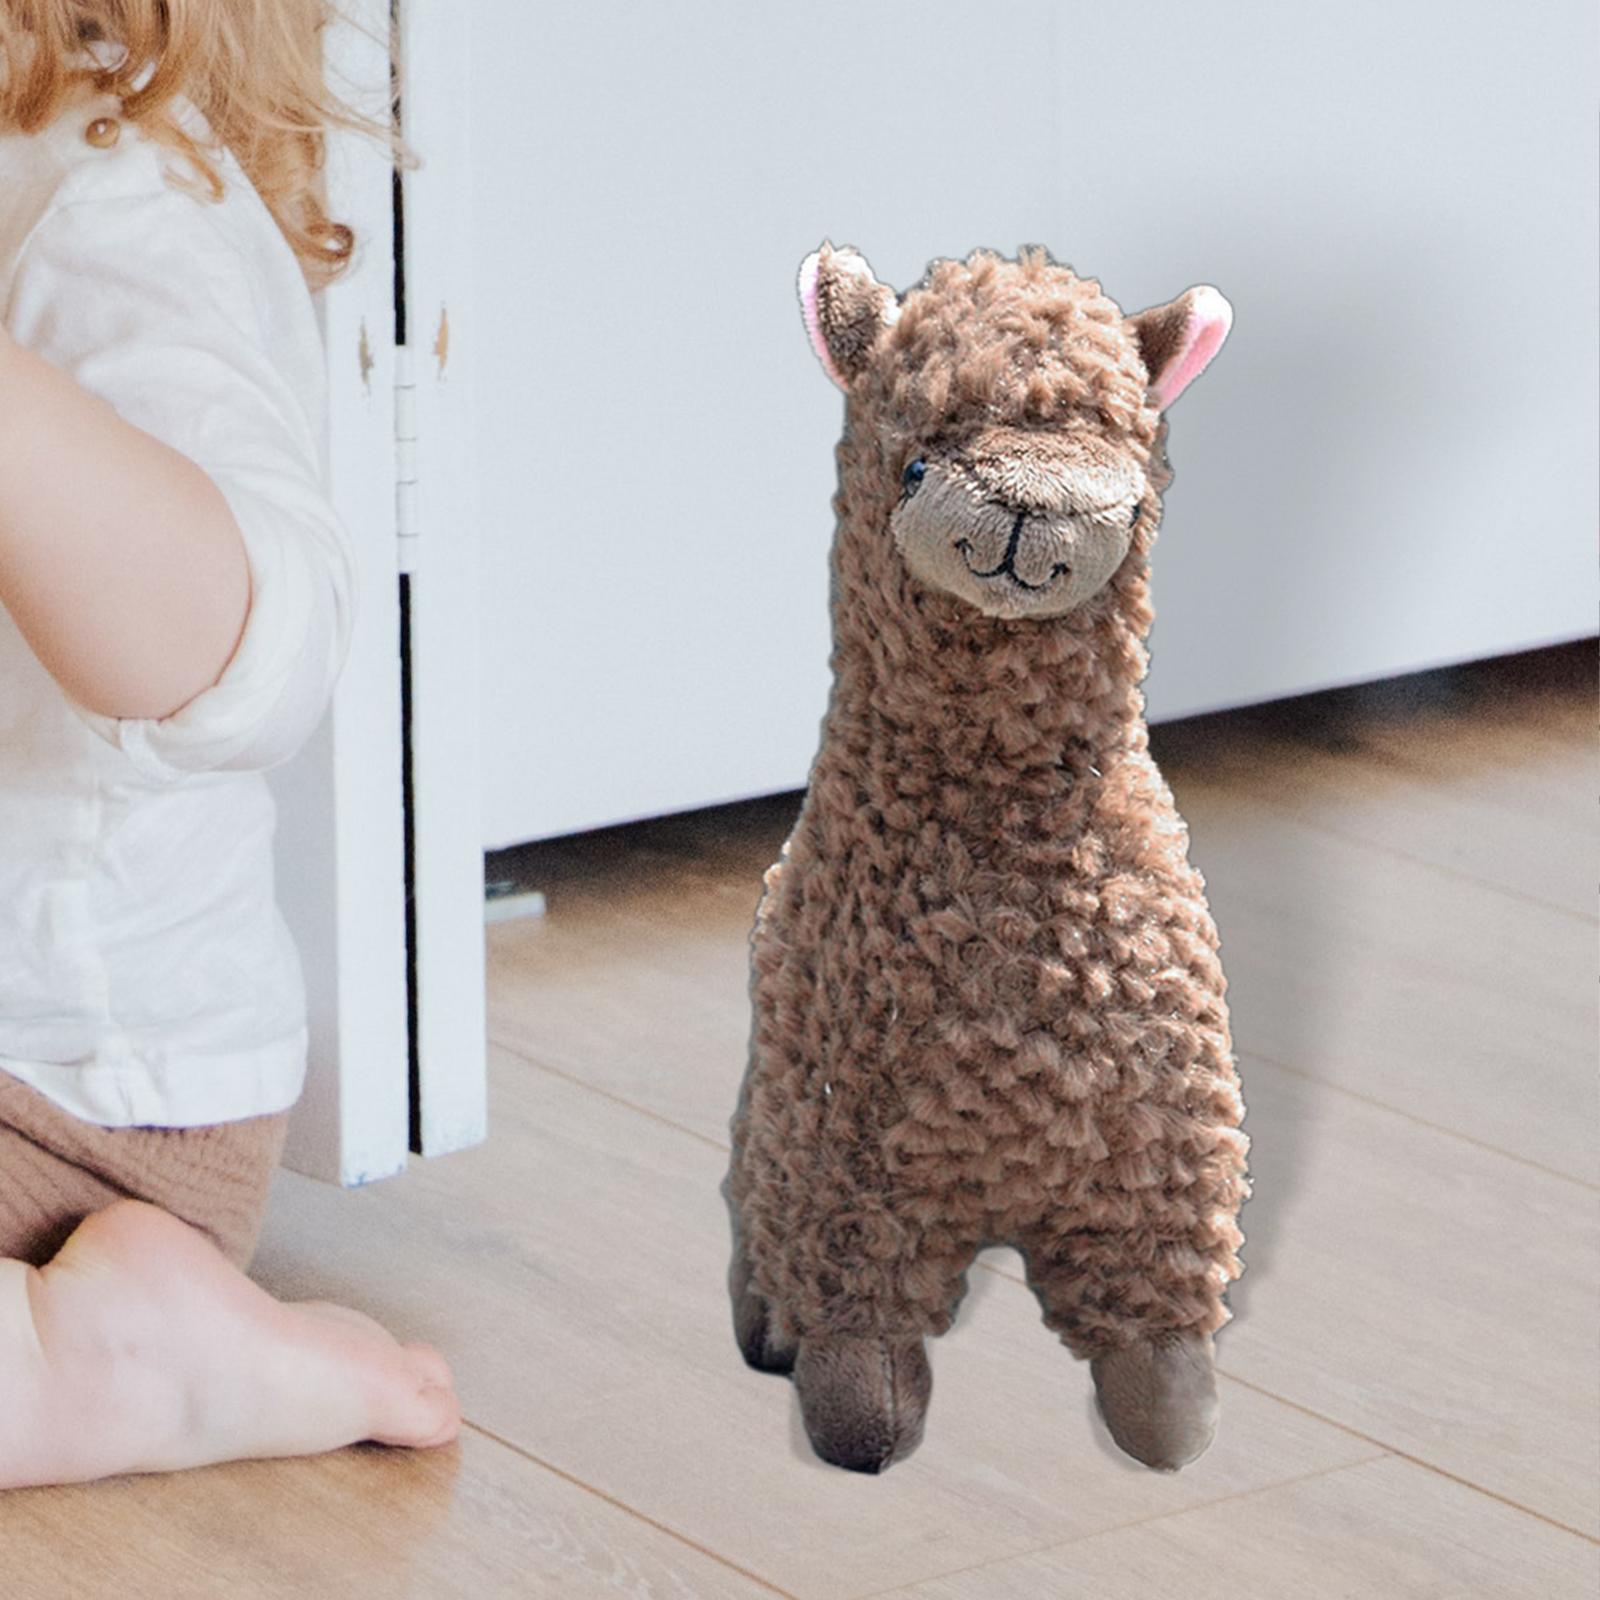 Animal Plush Toys Small Doll Alpaca Soft Ornaments for Kids Girls Boys Gifts Brown